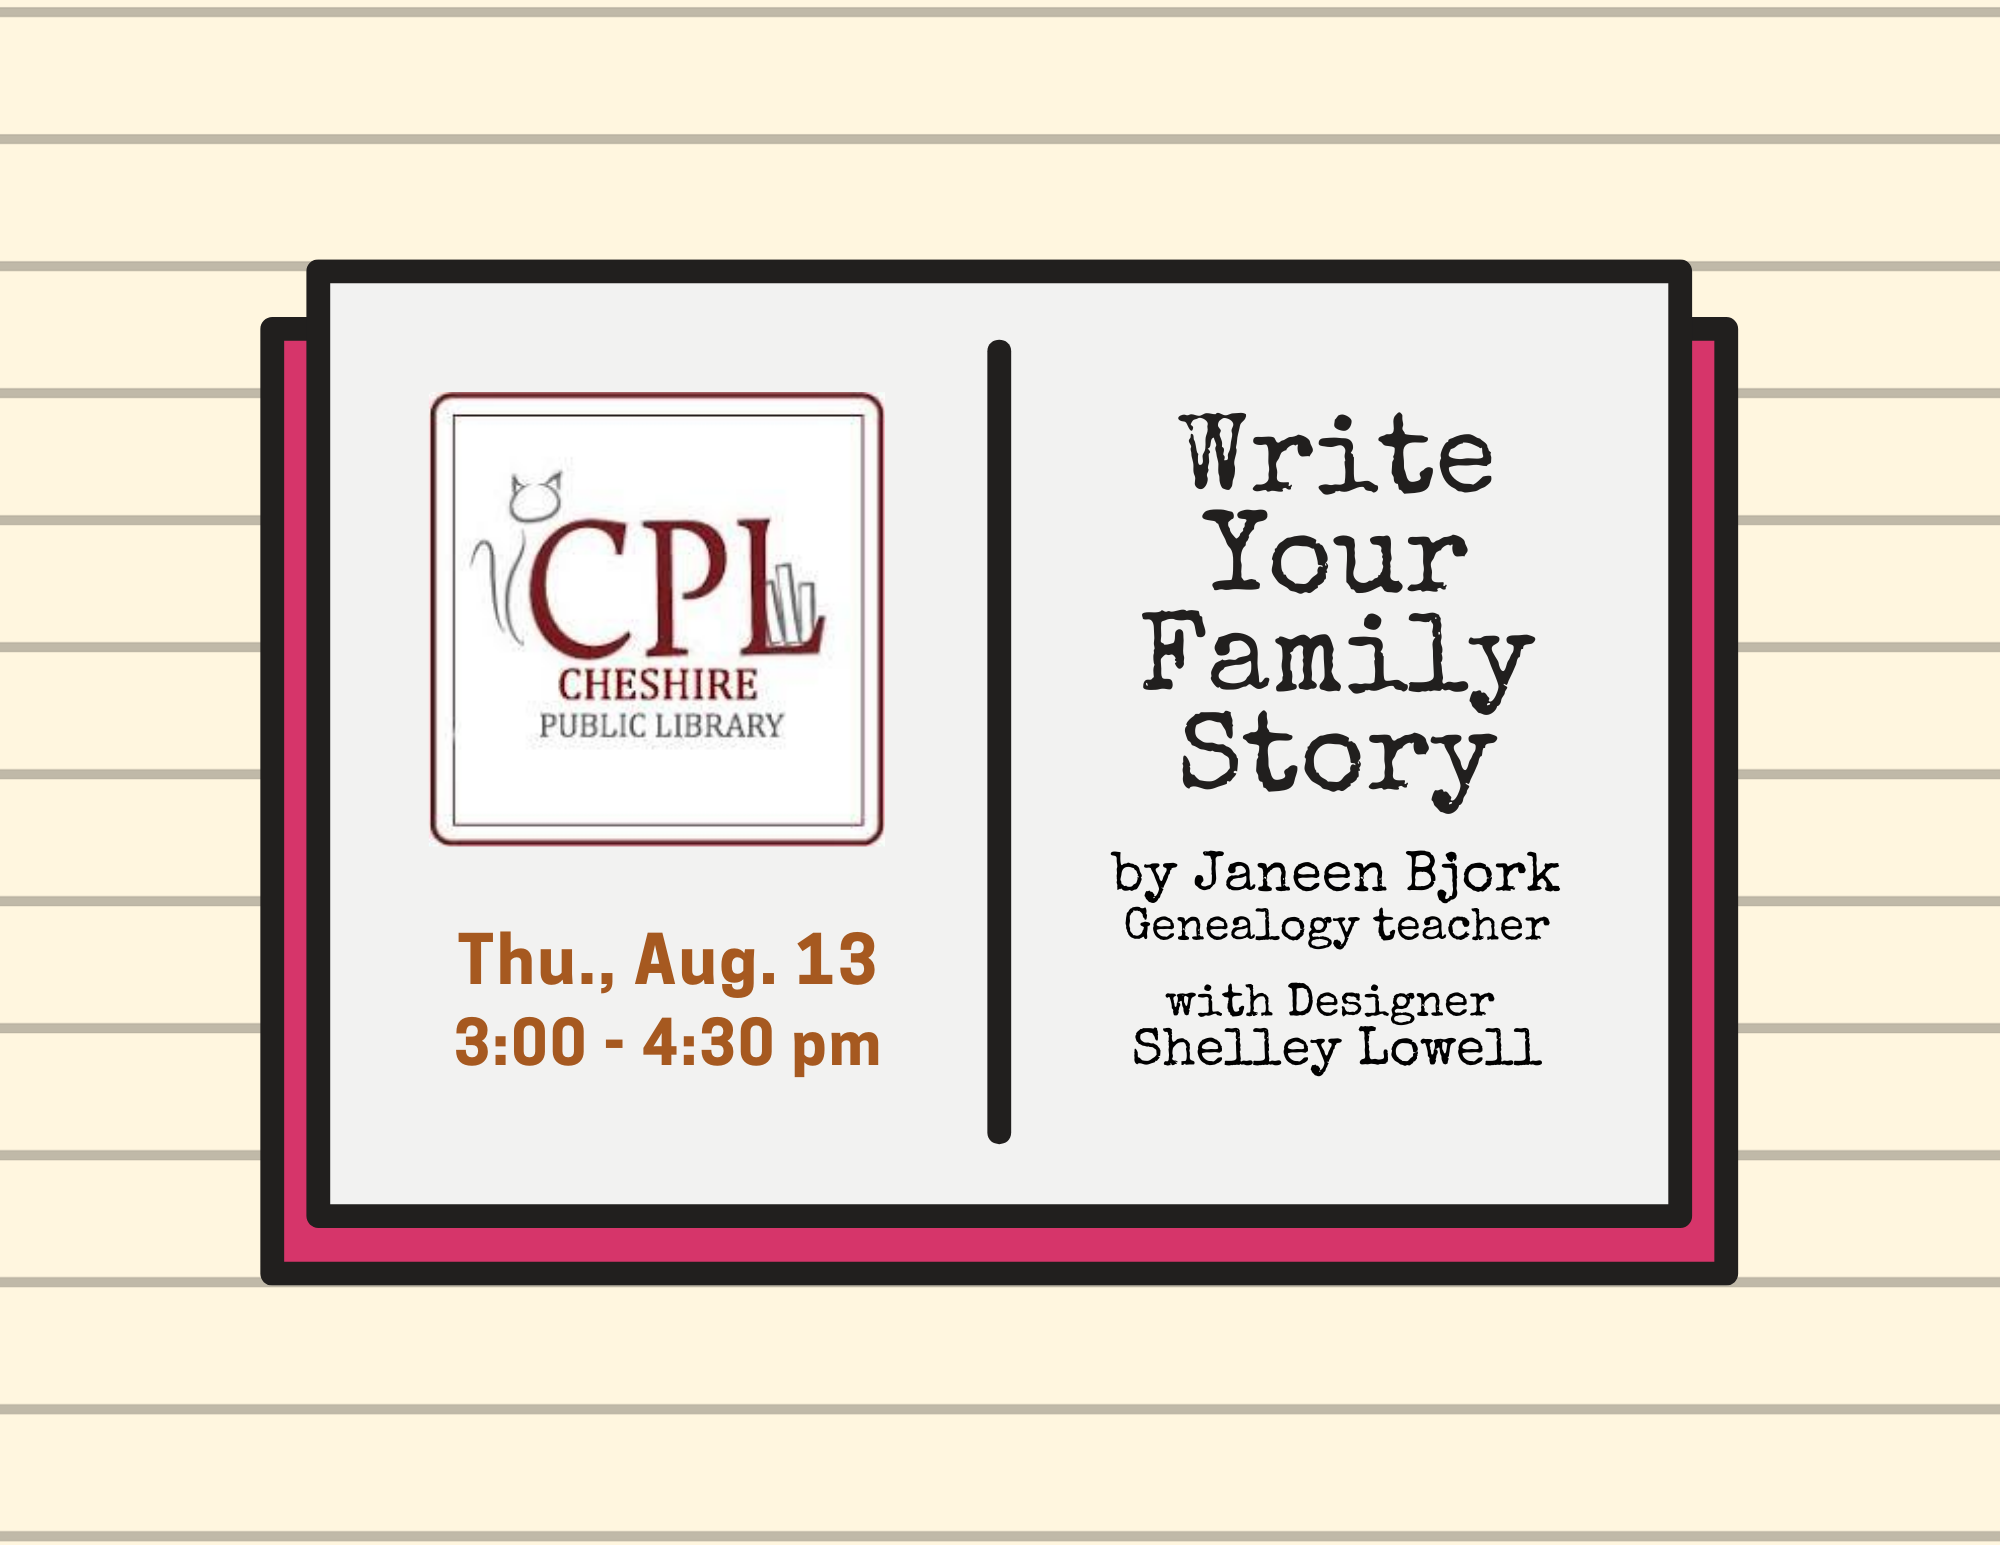 write your family story event